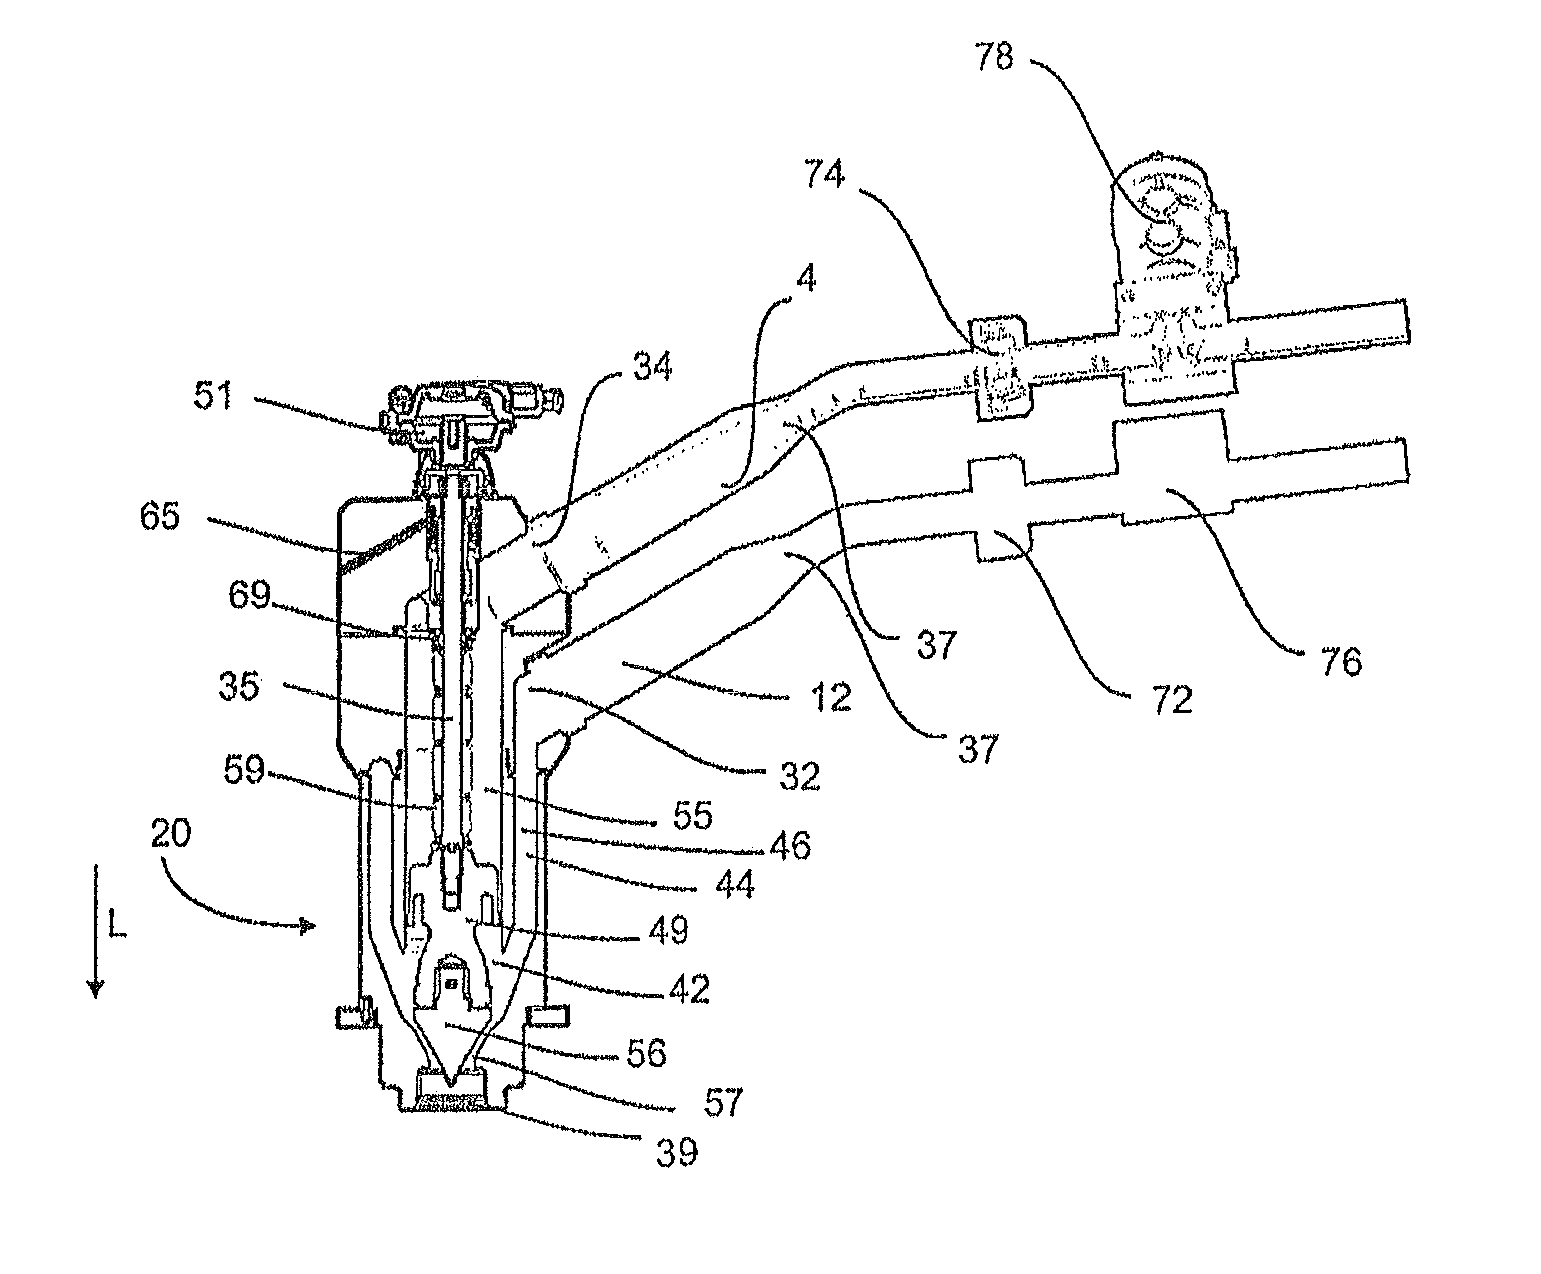 Filling device for filling containers